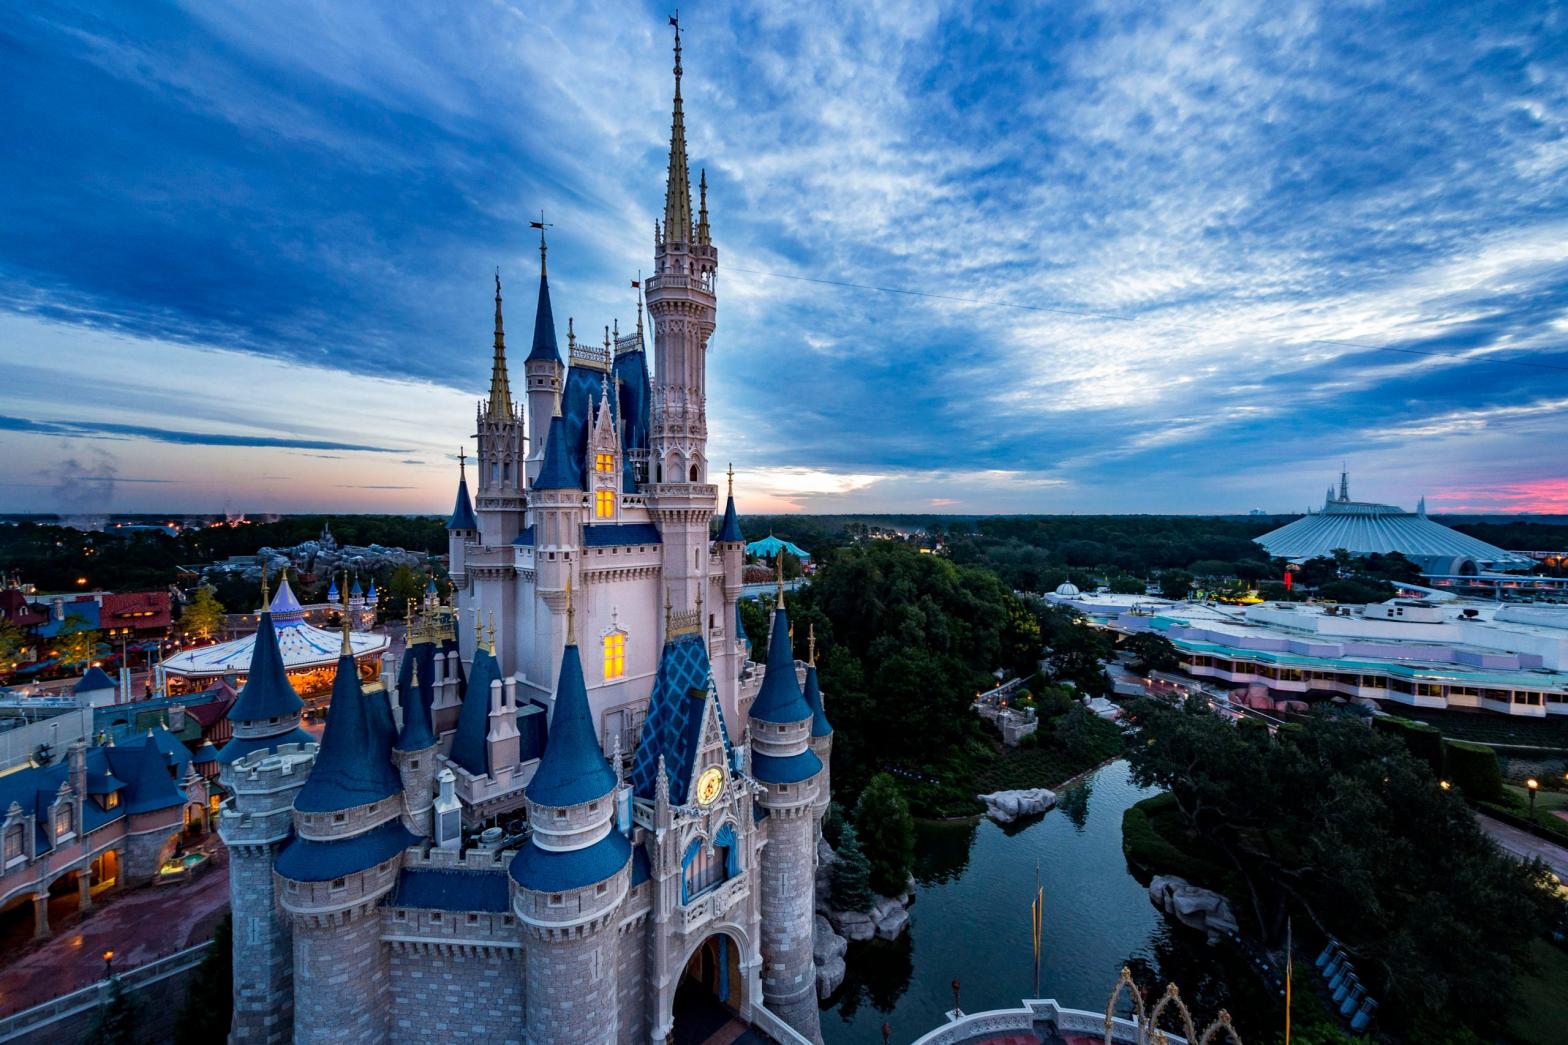 Senators in Florida voted on a bill that could dissolve Walt Disney World's special self-governing privileges (Photo: Handout, Getty Images)